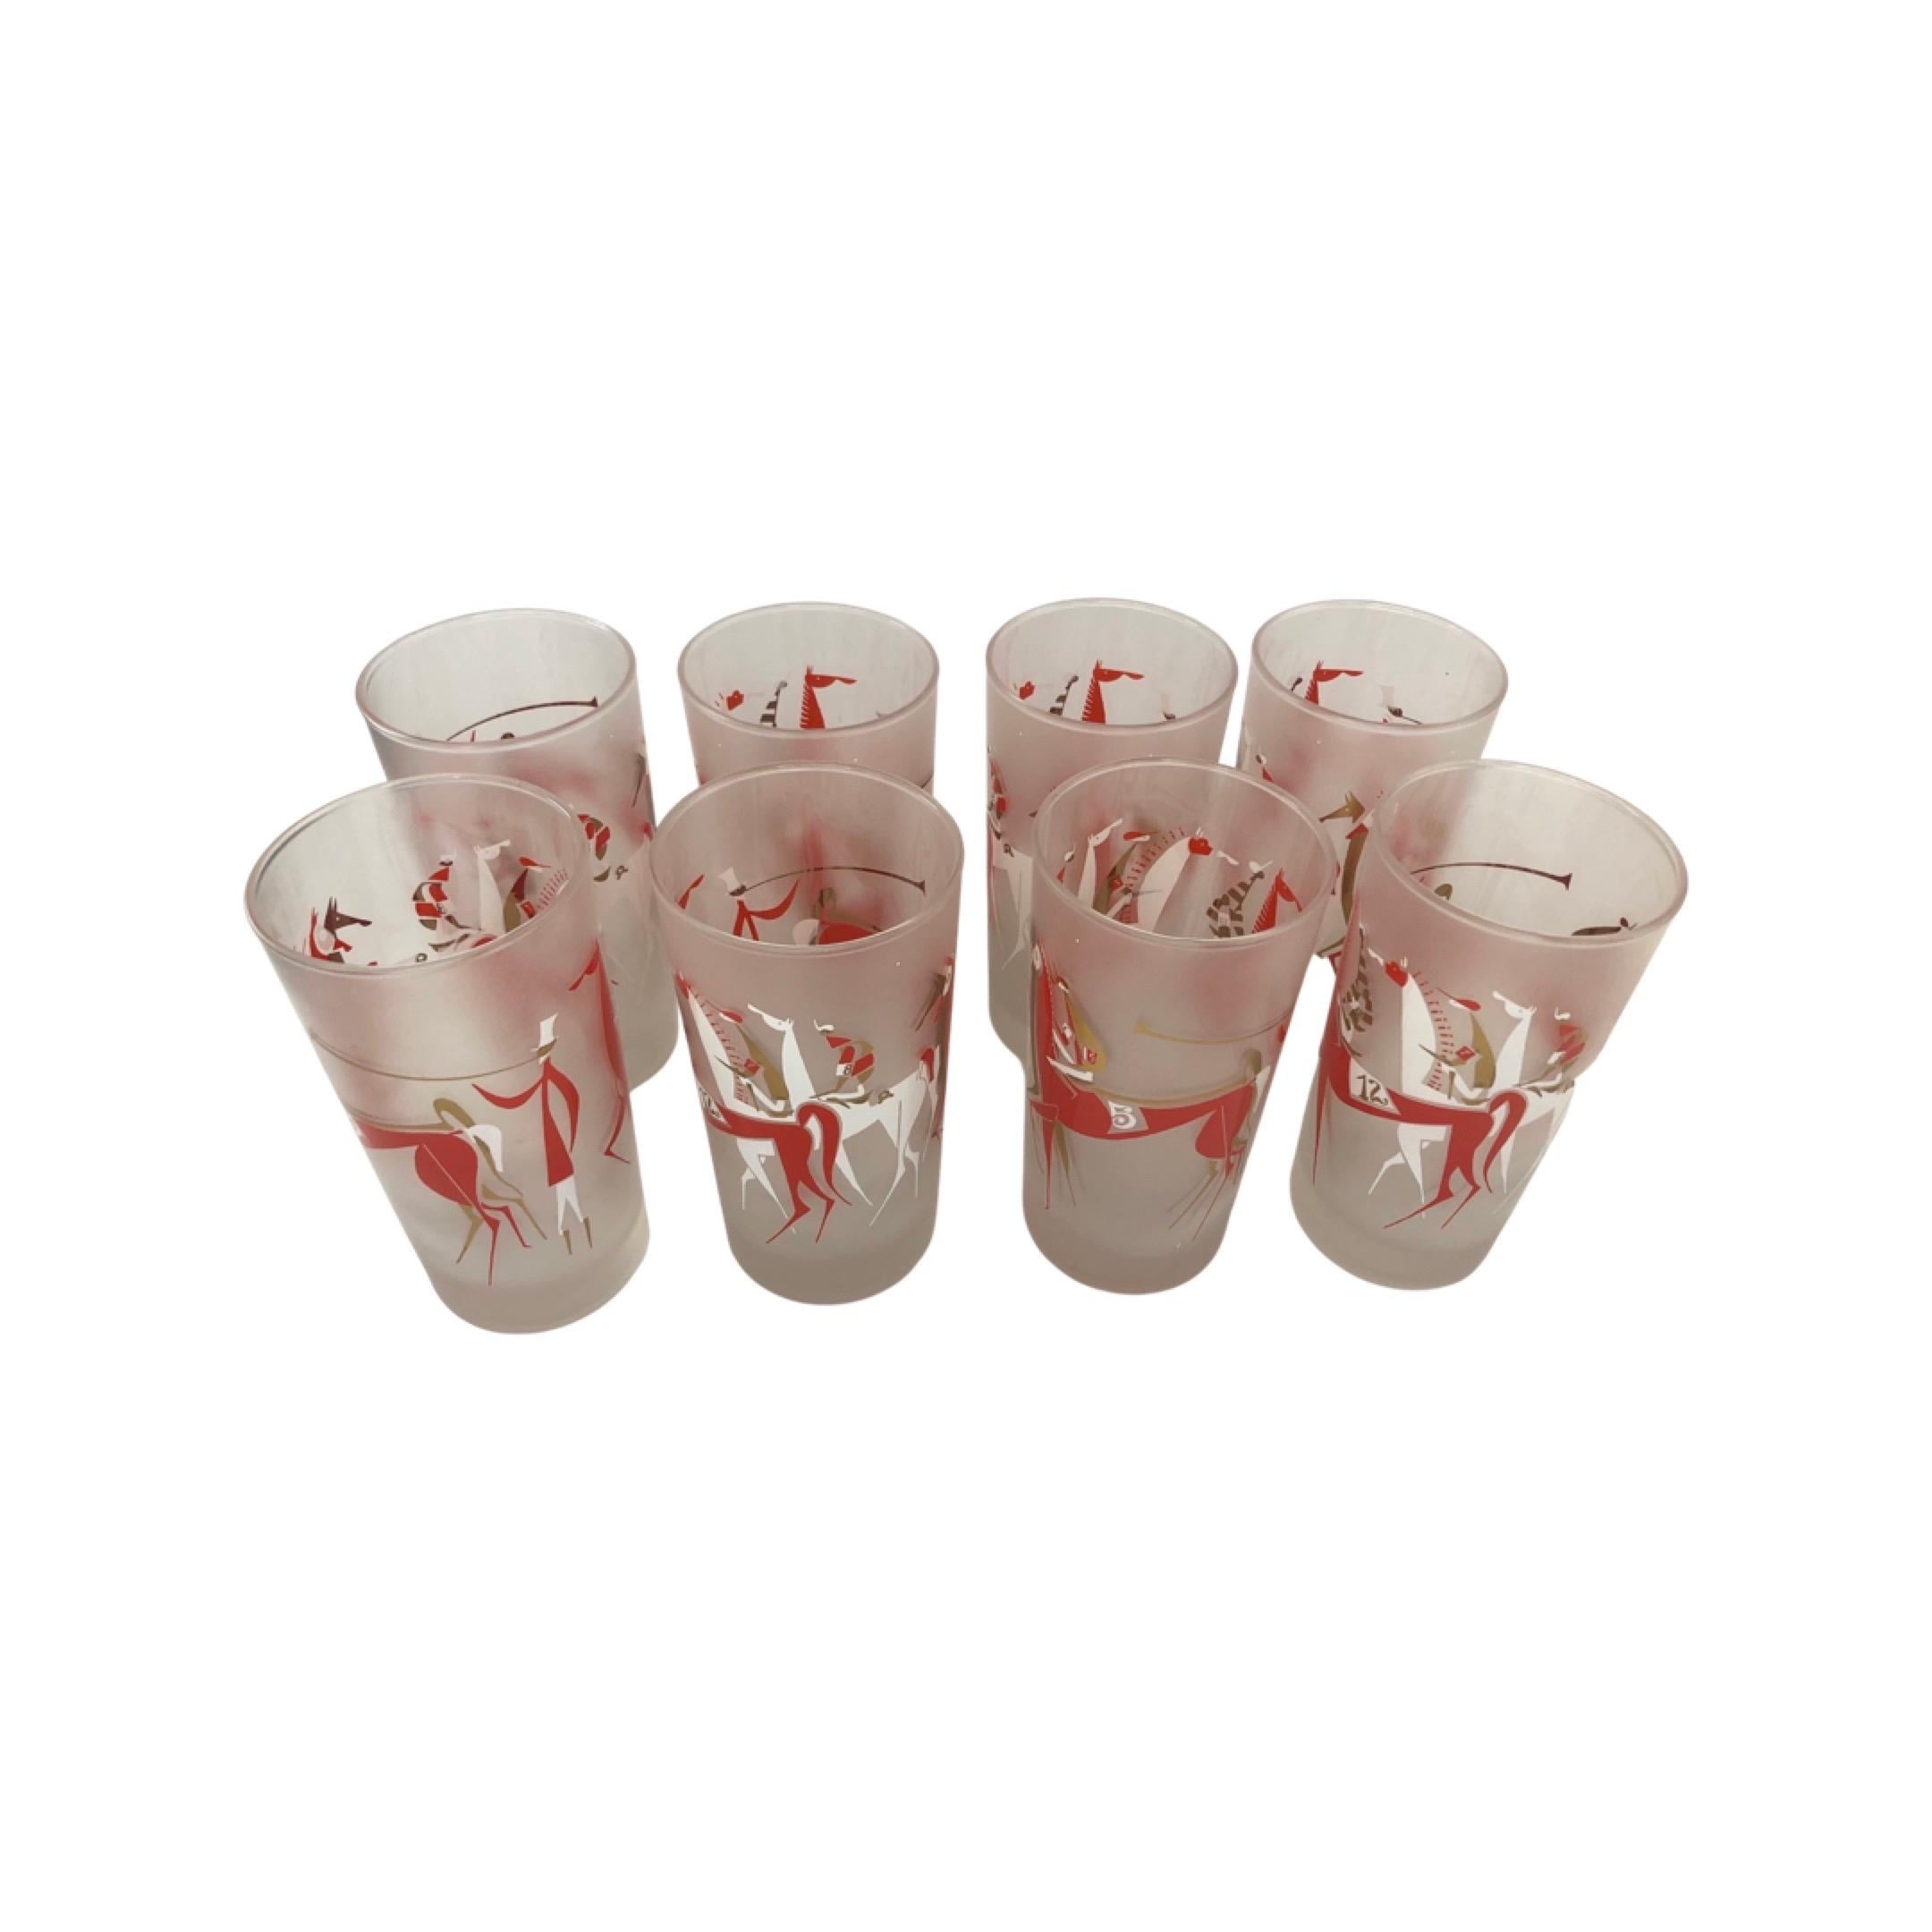  Set of 8 Vintage Libbey Highball Glasses in the Longchamp Pattern  In Good Condition For Sale In Chapel Hill, NC